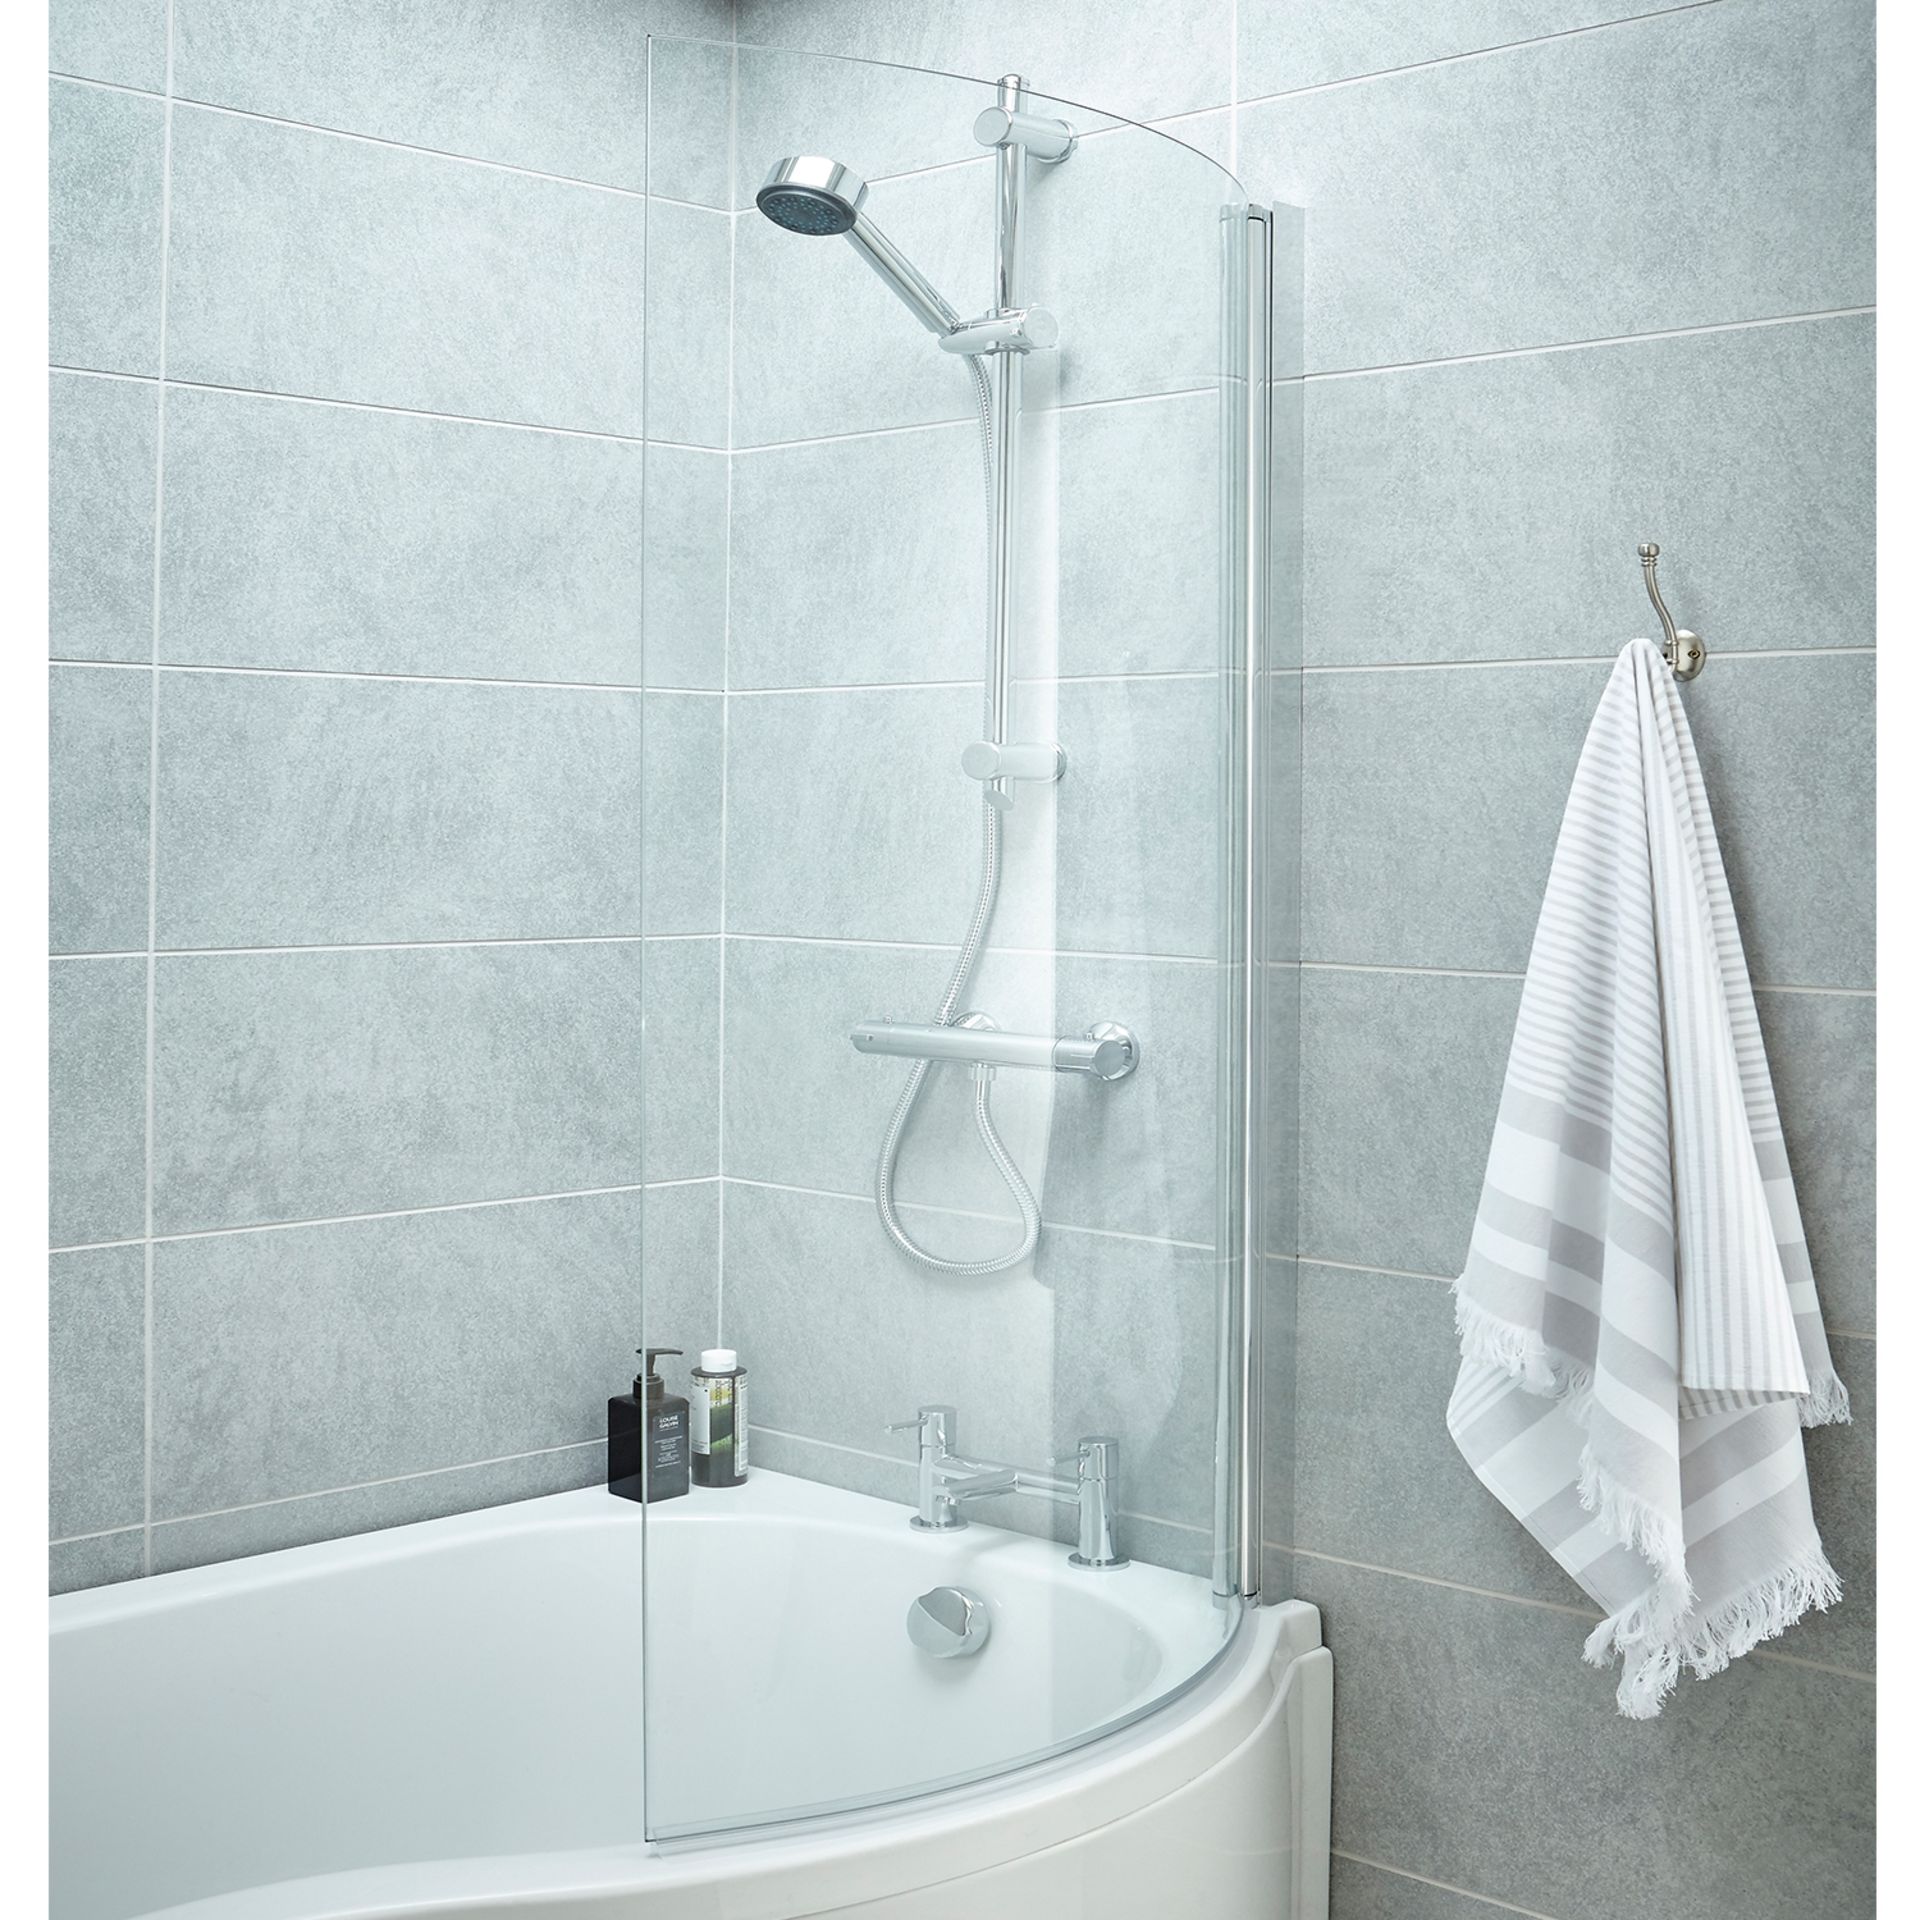 858-9 | 9 x TRANQUIL RH CORNER SHOWER BATH SCREEN RRP of Pallet - £1421.91 Delivery charged at £50 +